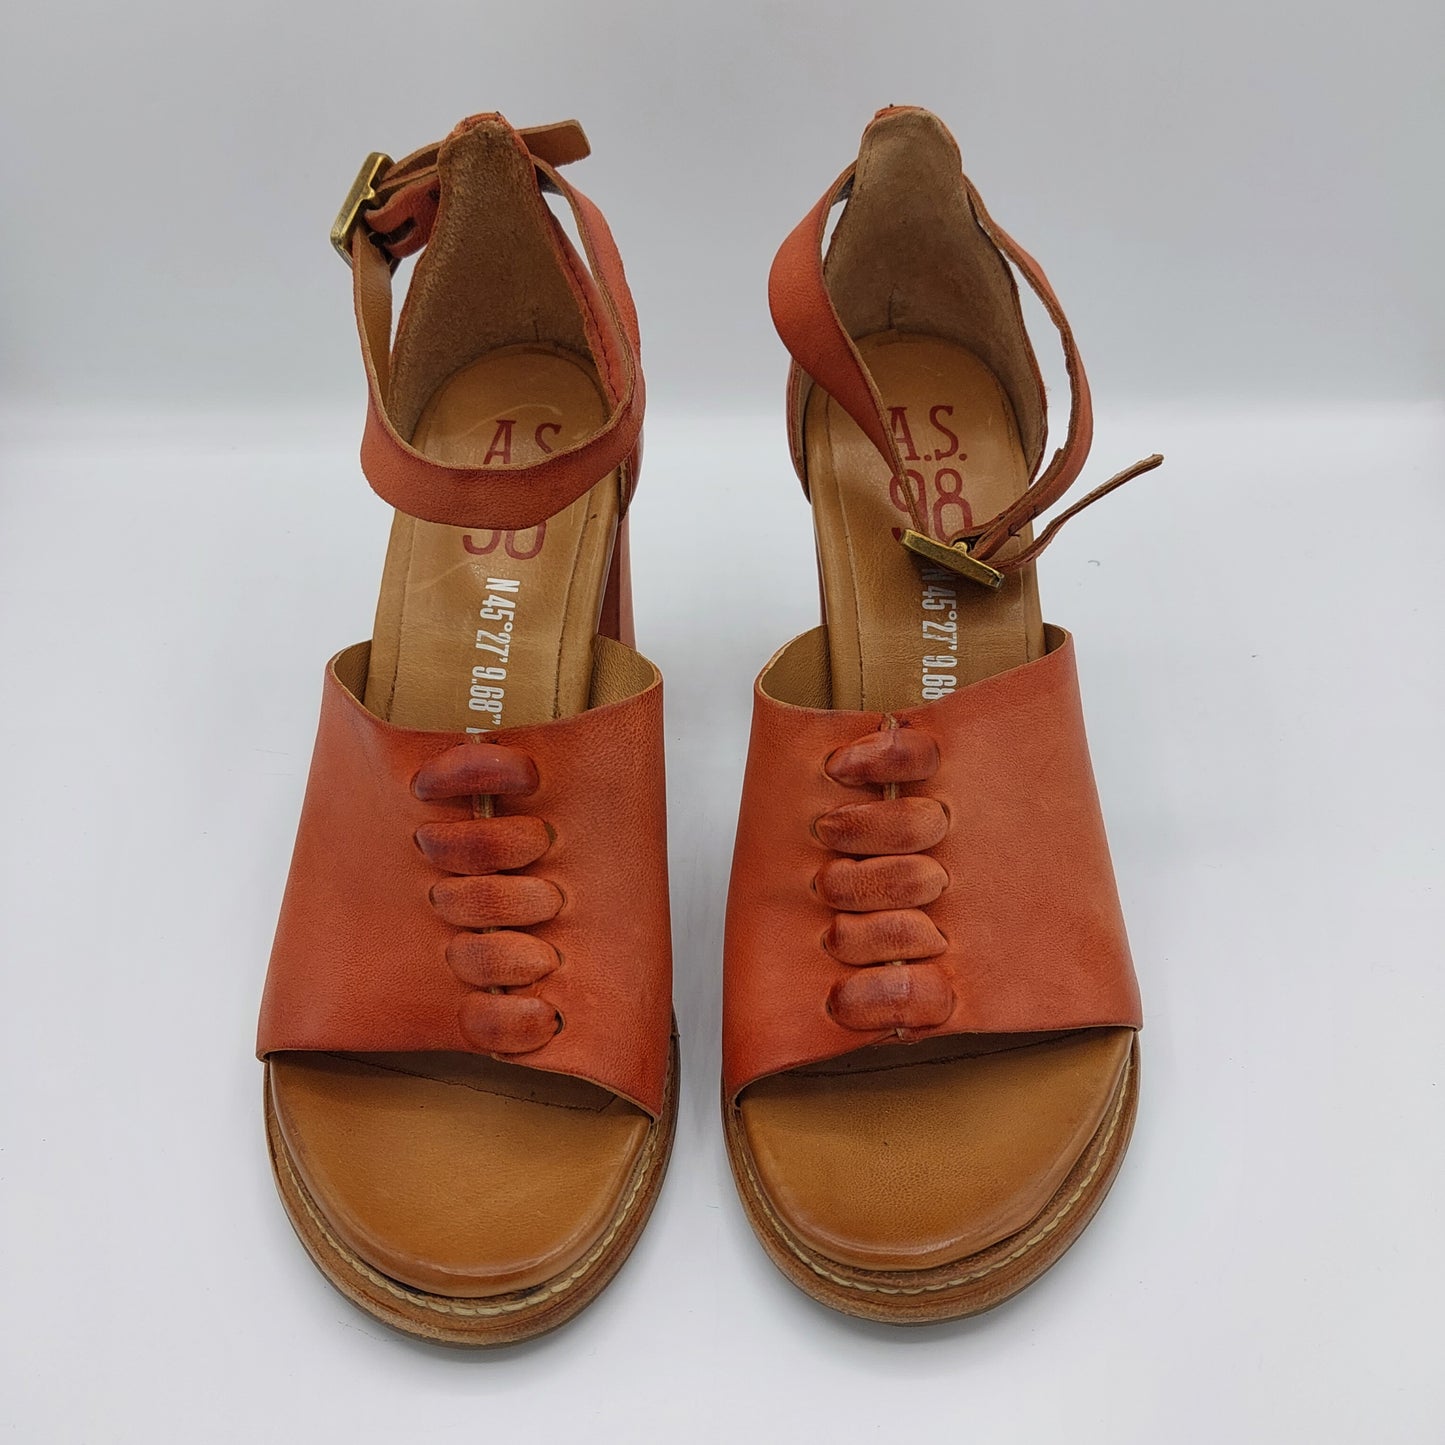 SandalA.S.98 red leather with heel